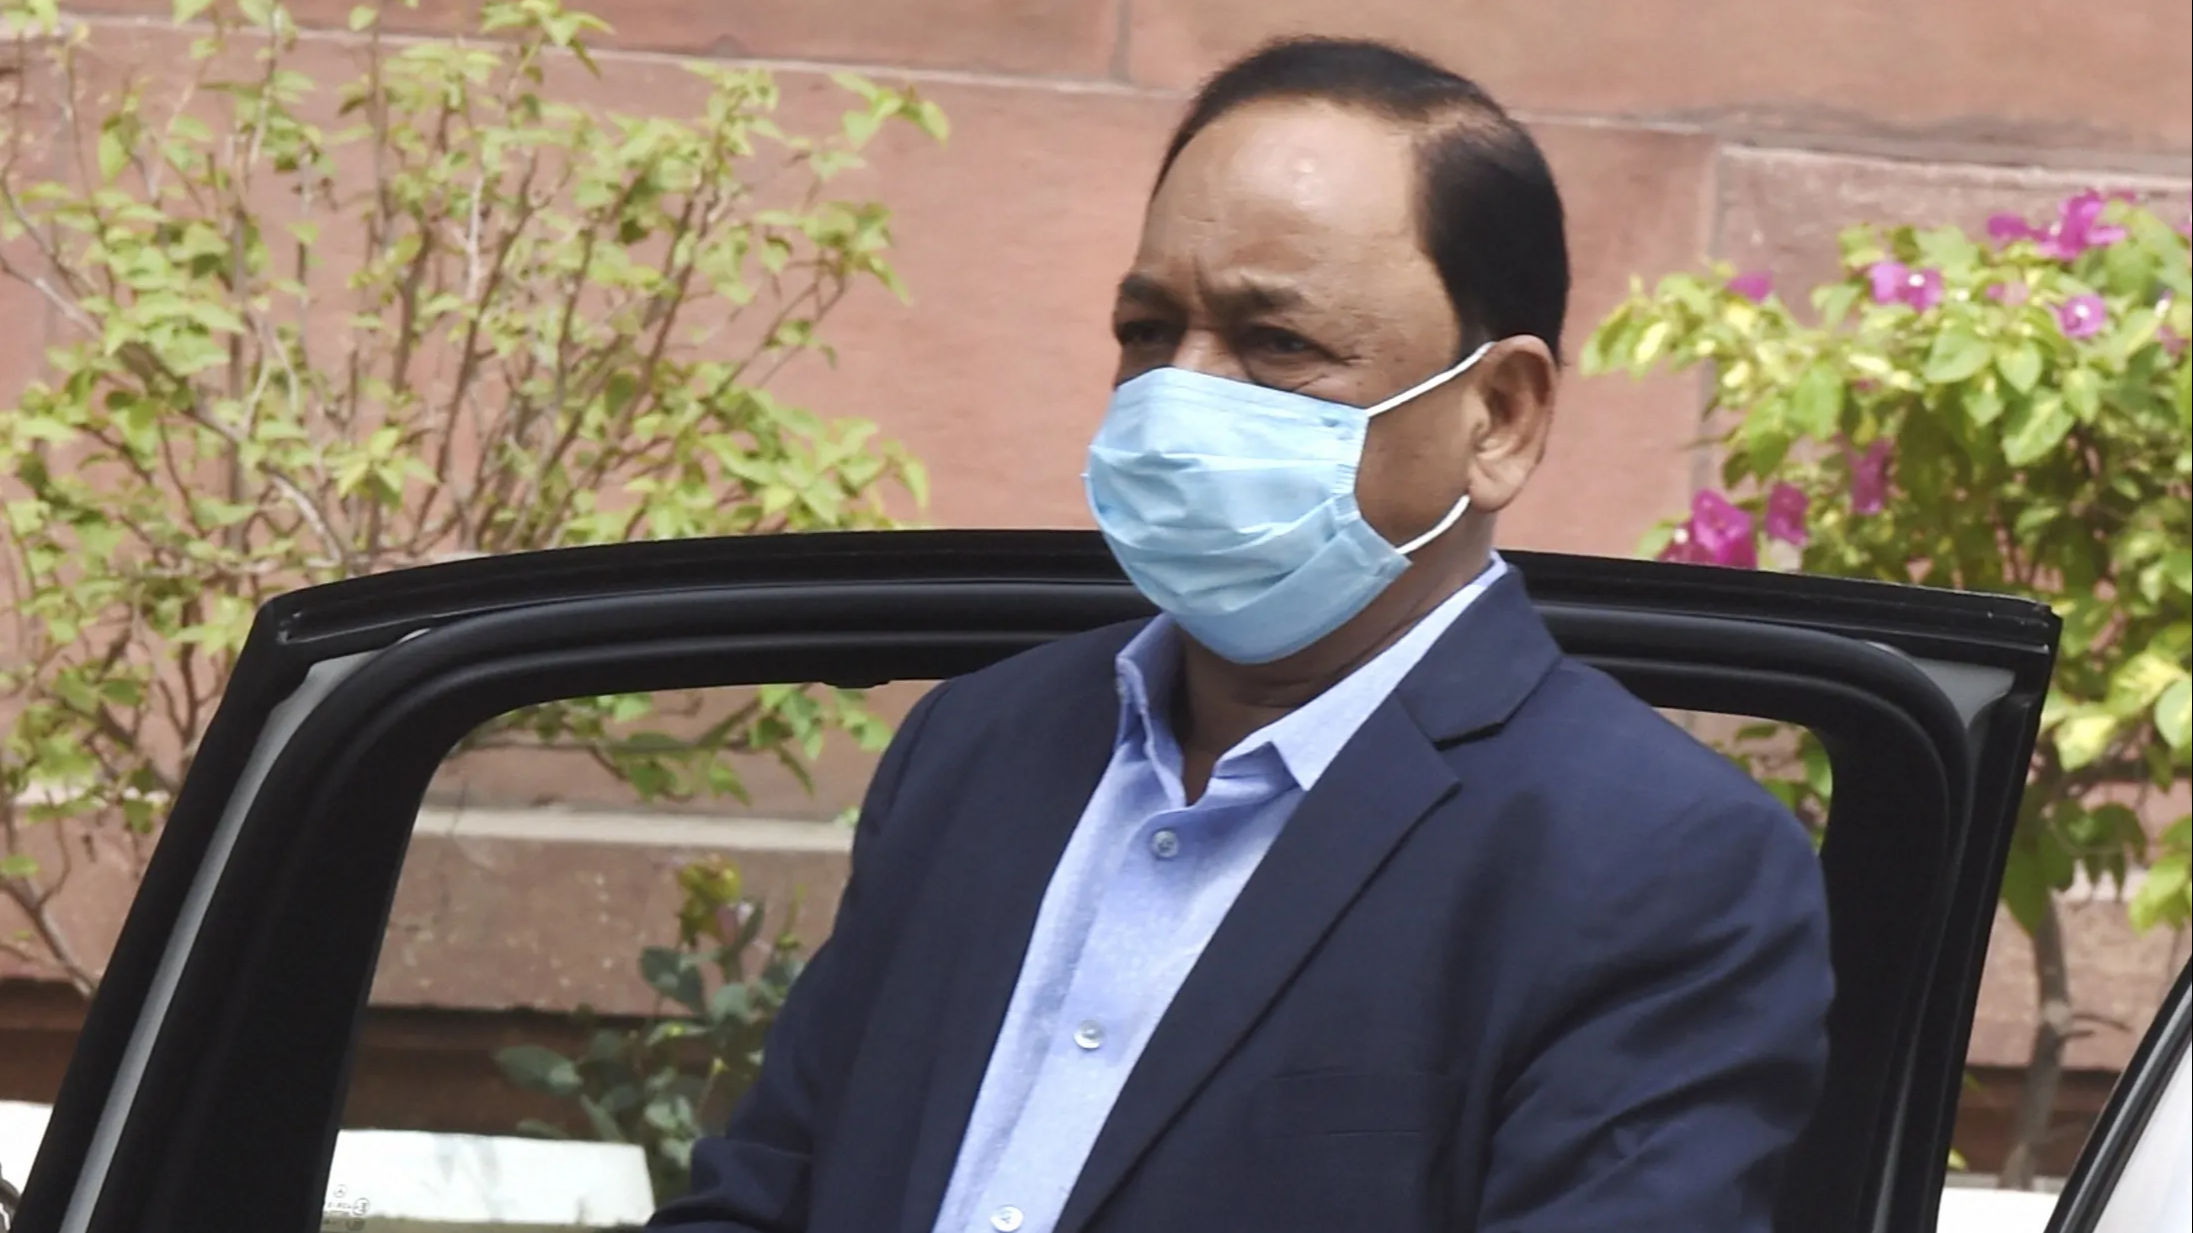 Union minister Narayan Rane arrested after ‘Uddhav slapping’ remark